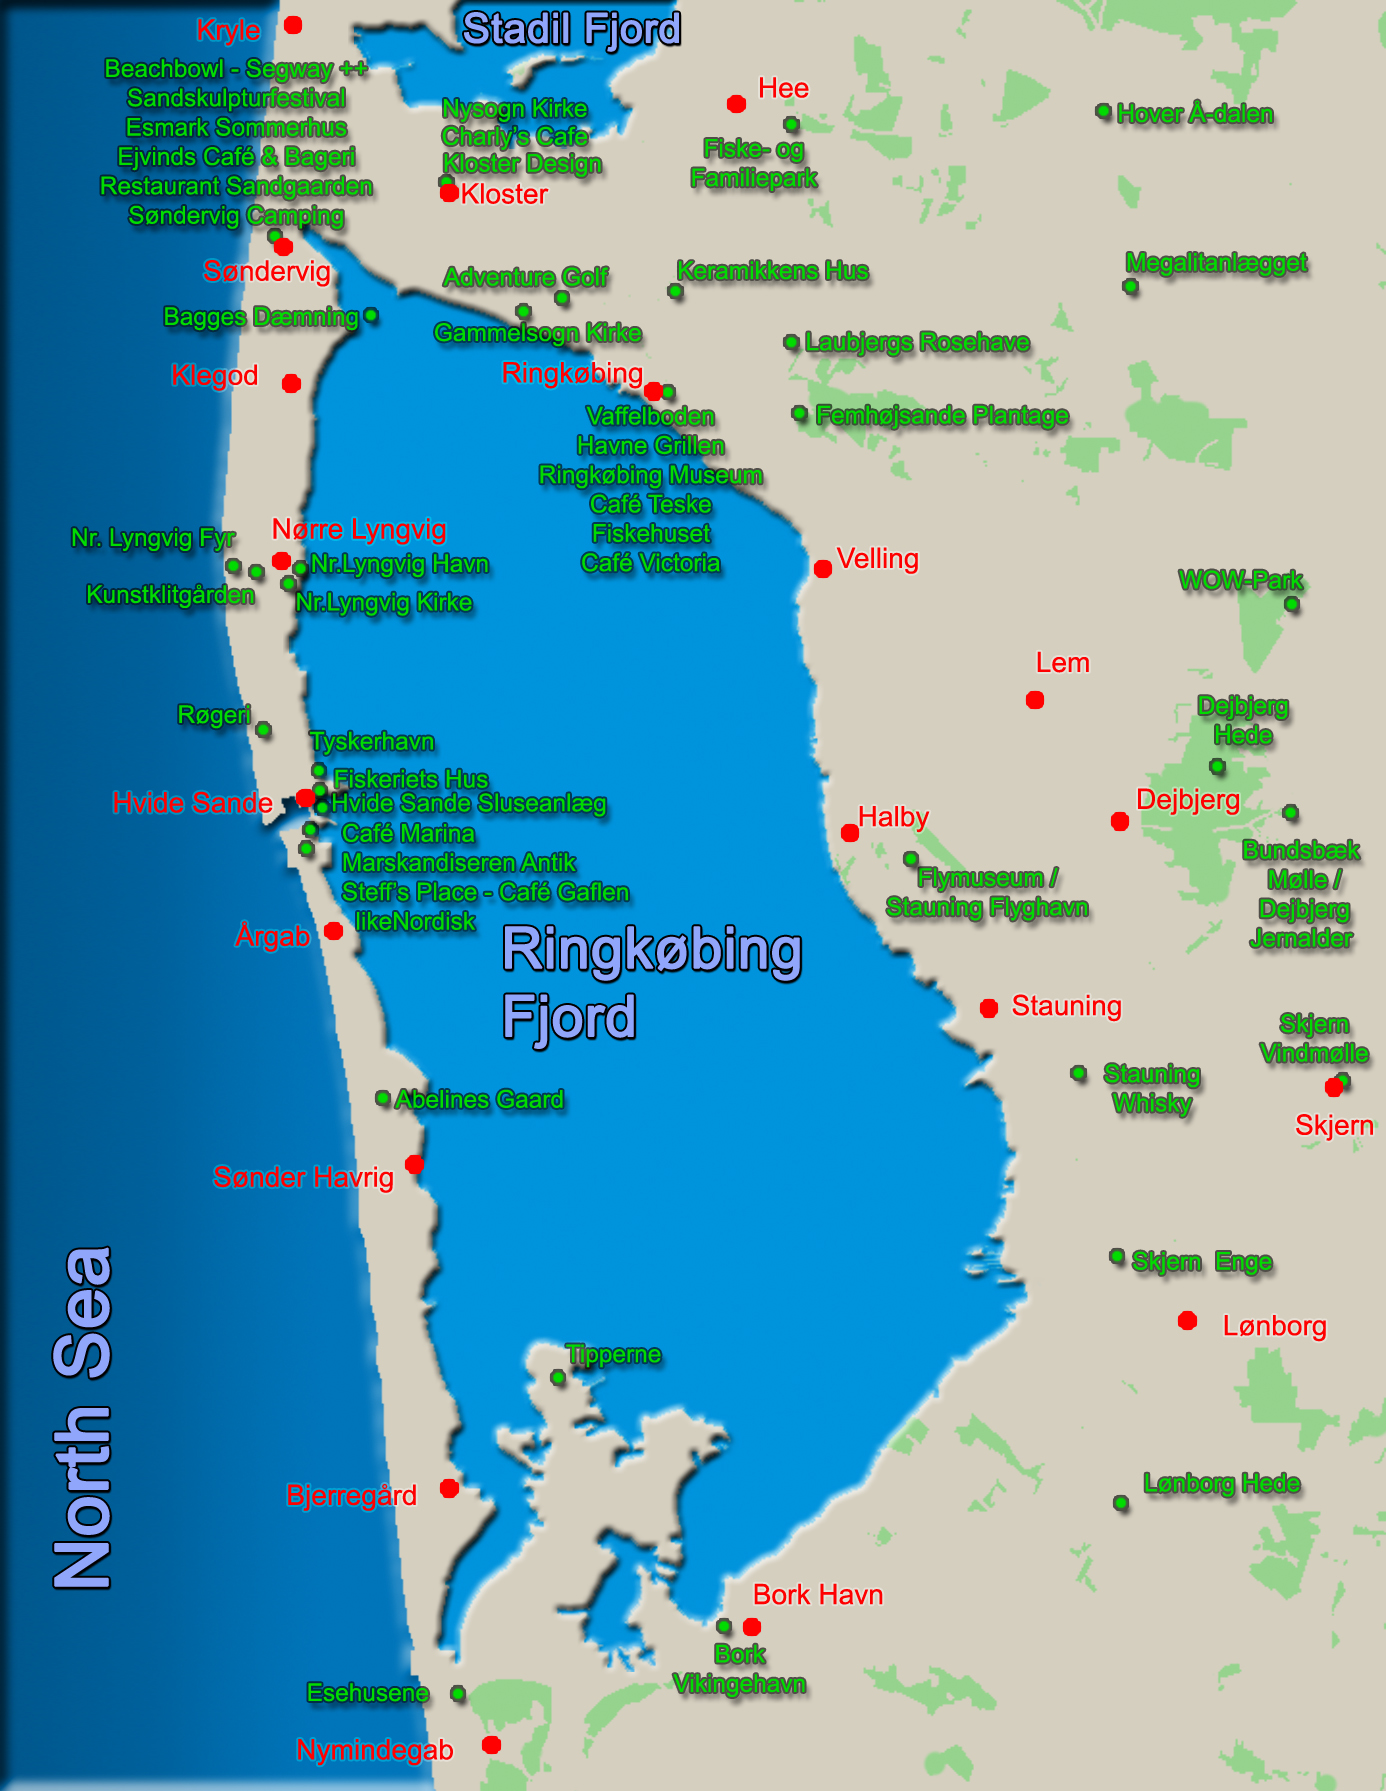 Ringkøbing Fjord Map - Guide / Attractions / Points of Interest